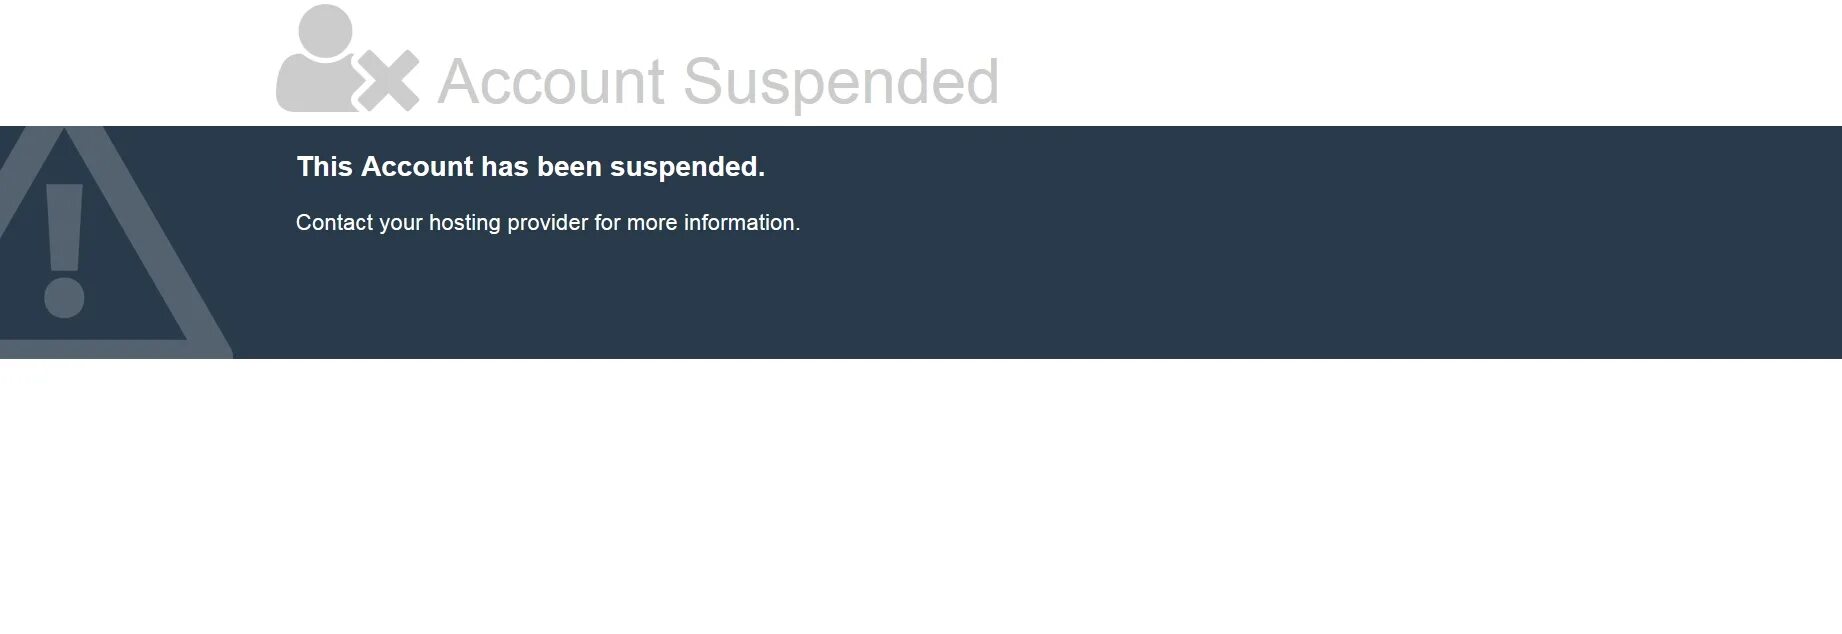 Account expired. Салон авиакомпании this account has been suspended. This account is suspended. His account has been suspended. Contact your hosting provider for more information..